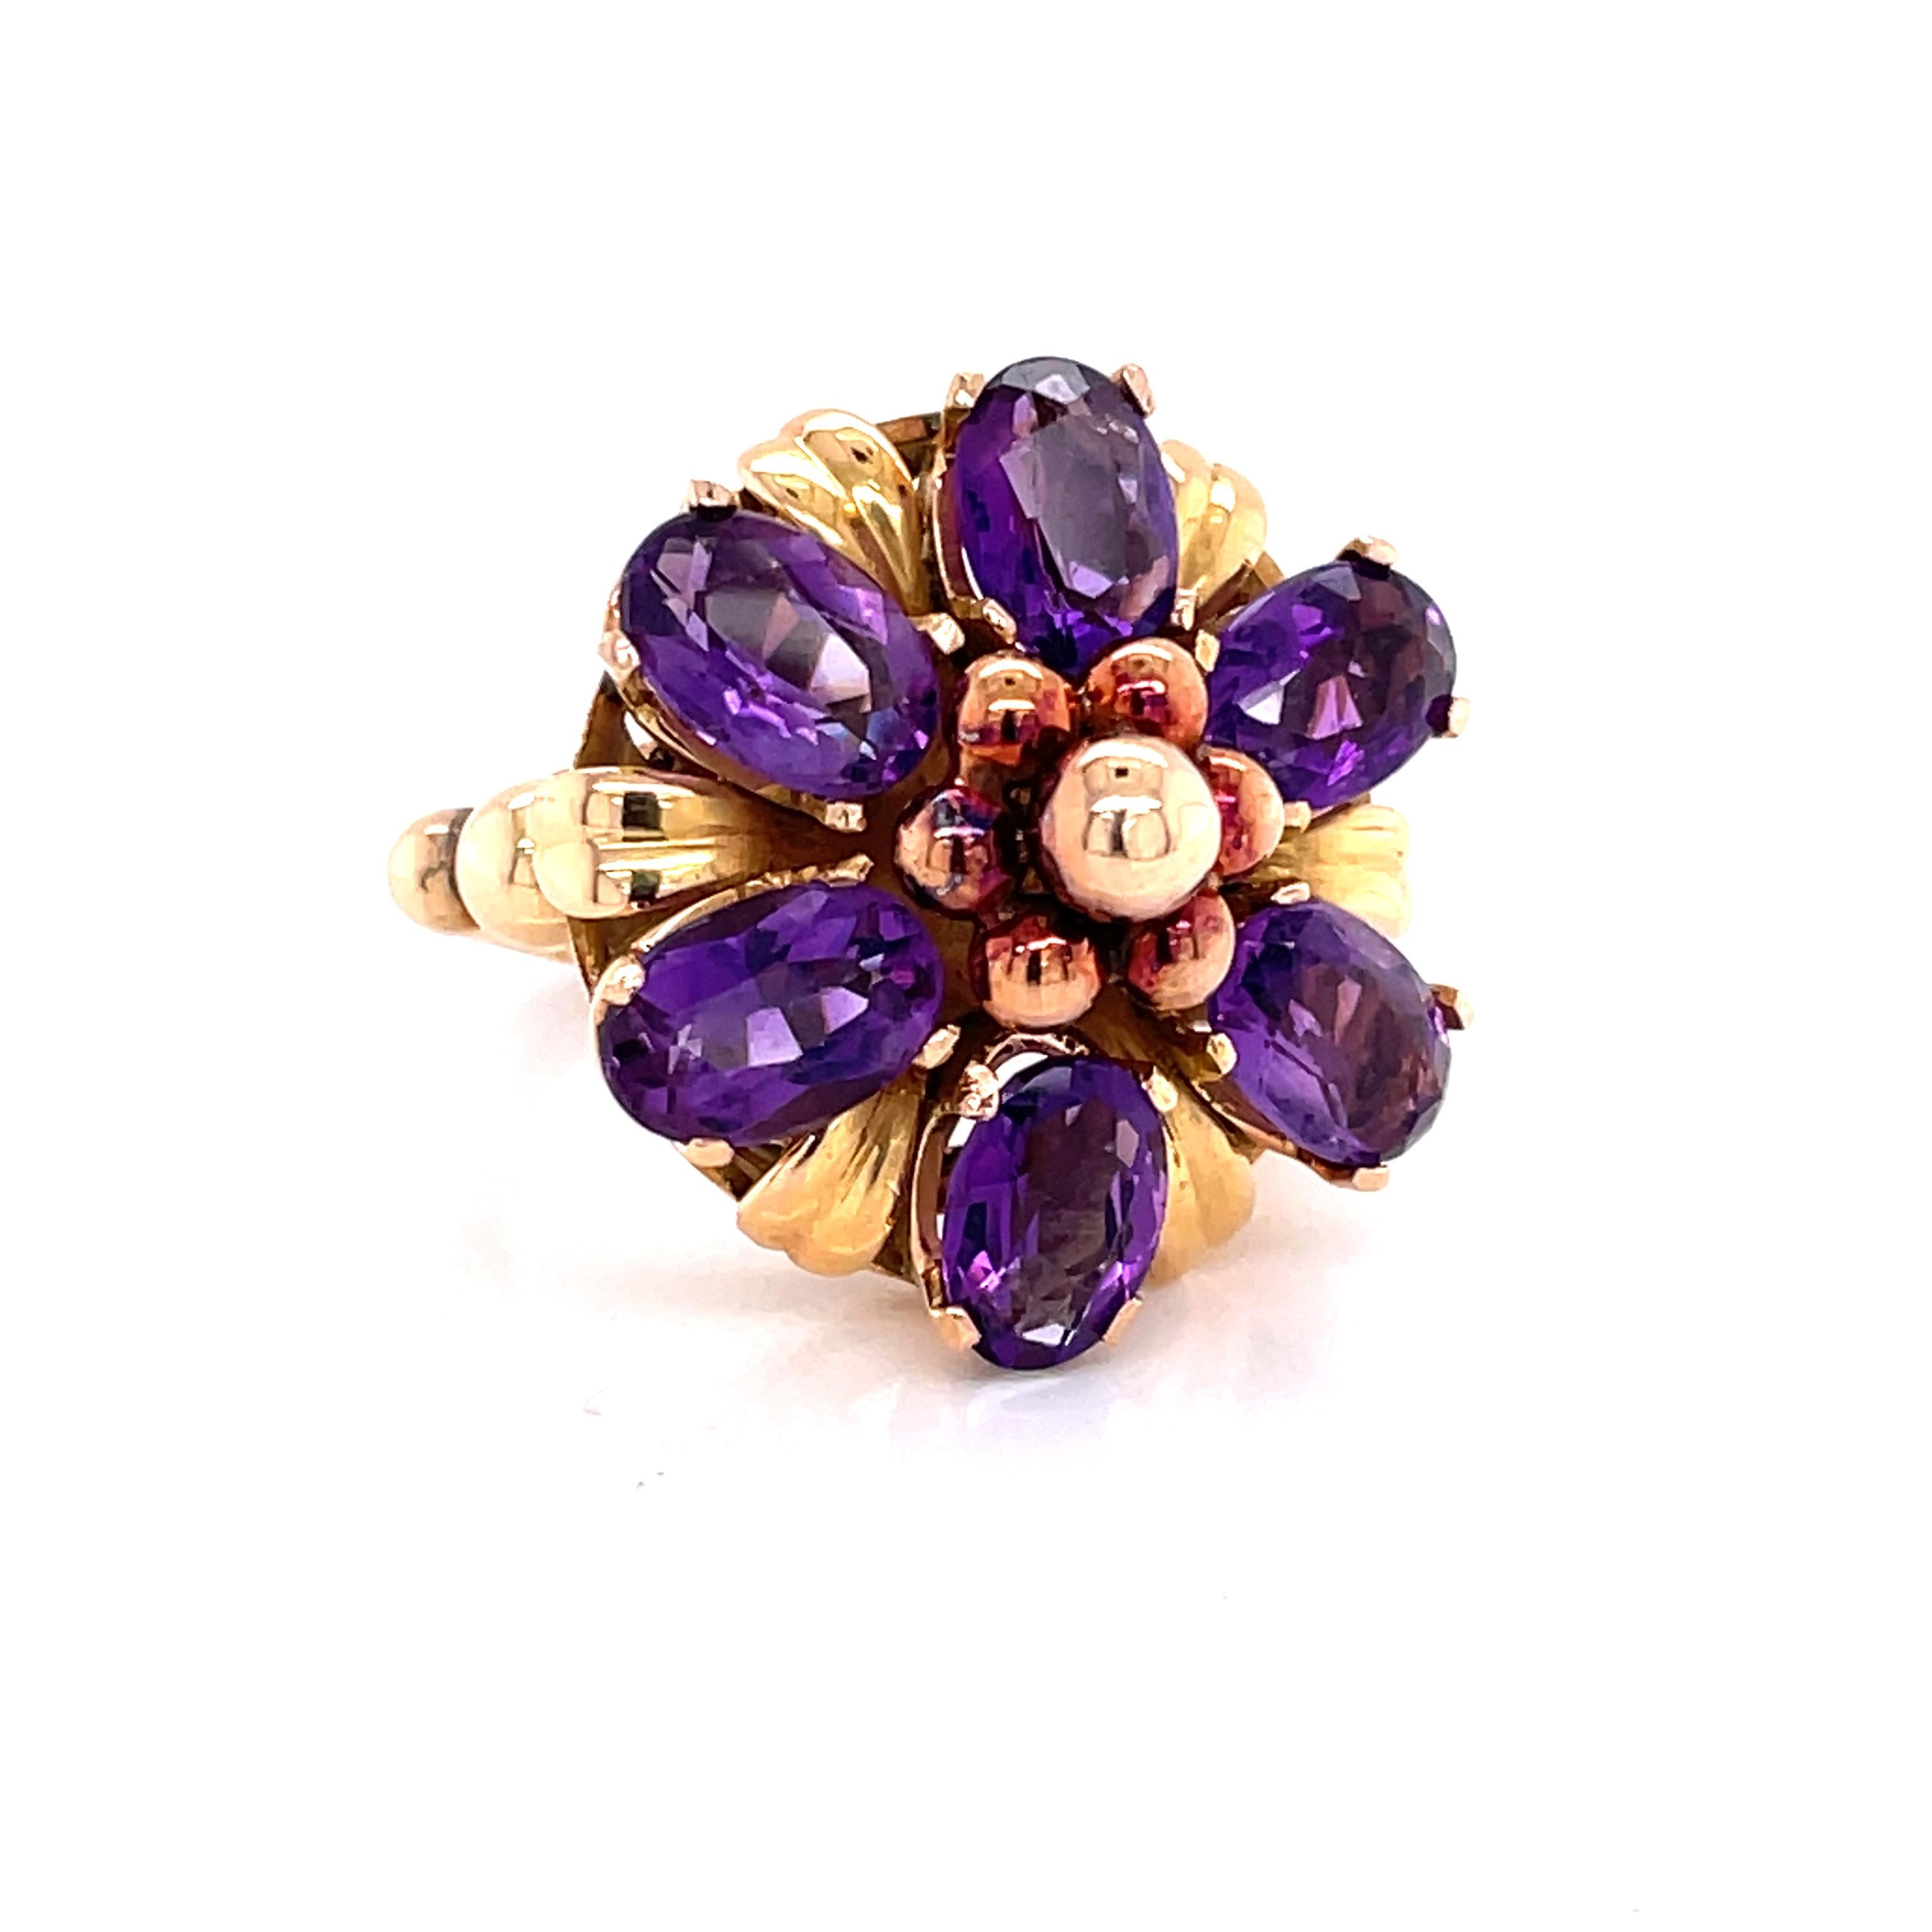 Six vivid .23 carat oval faceted amethyst gemstones, 1.38 carat total weight, are accented with petals of bright eighteen karat 18 karat yellow gold to create this European handmade floral inspired cocktail ring. Impressive ornate adornments and